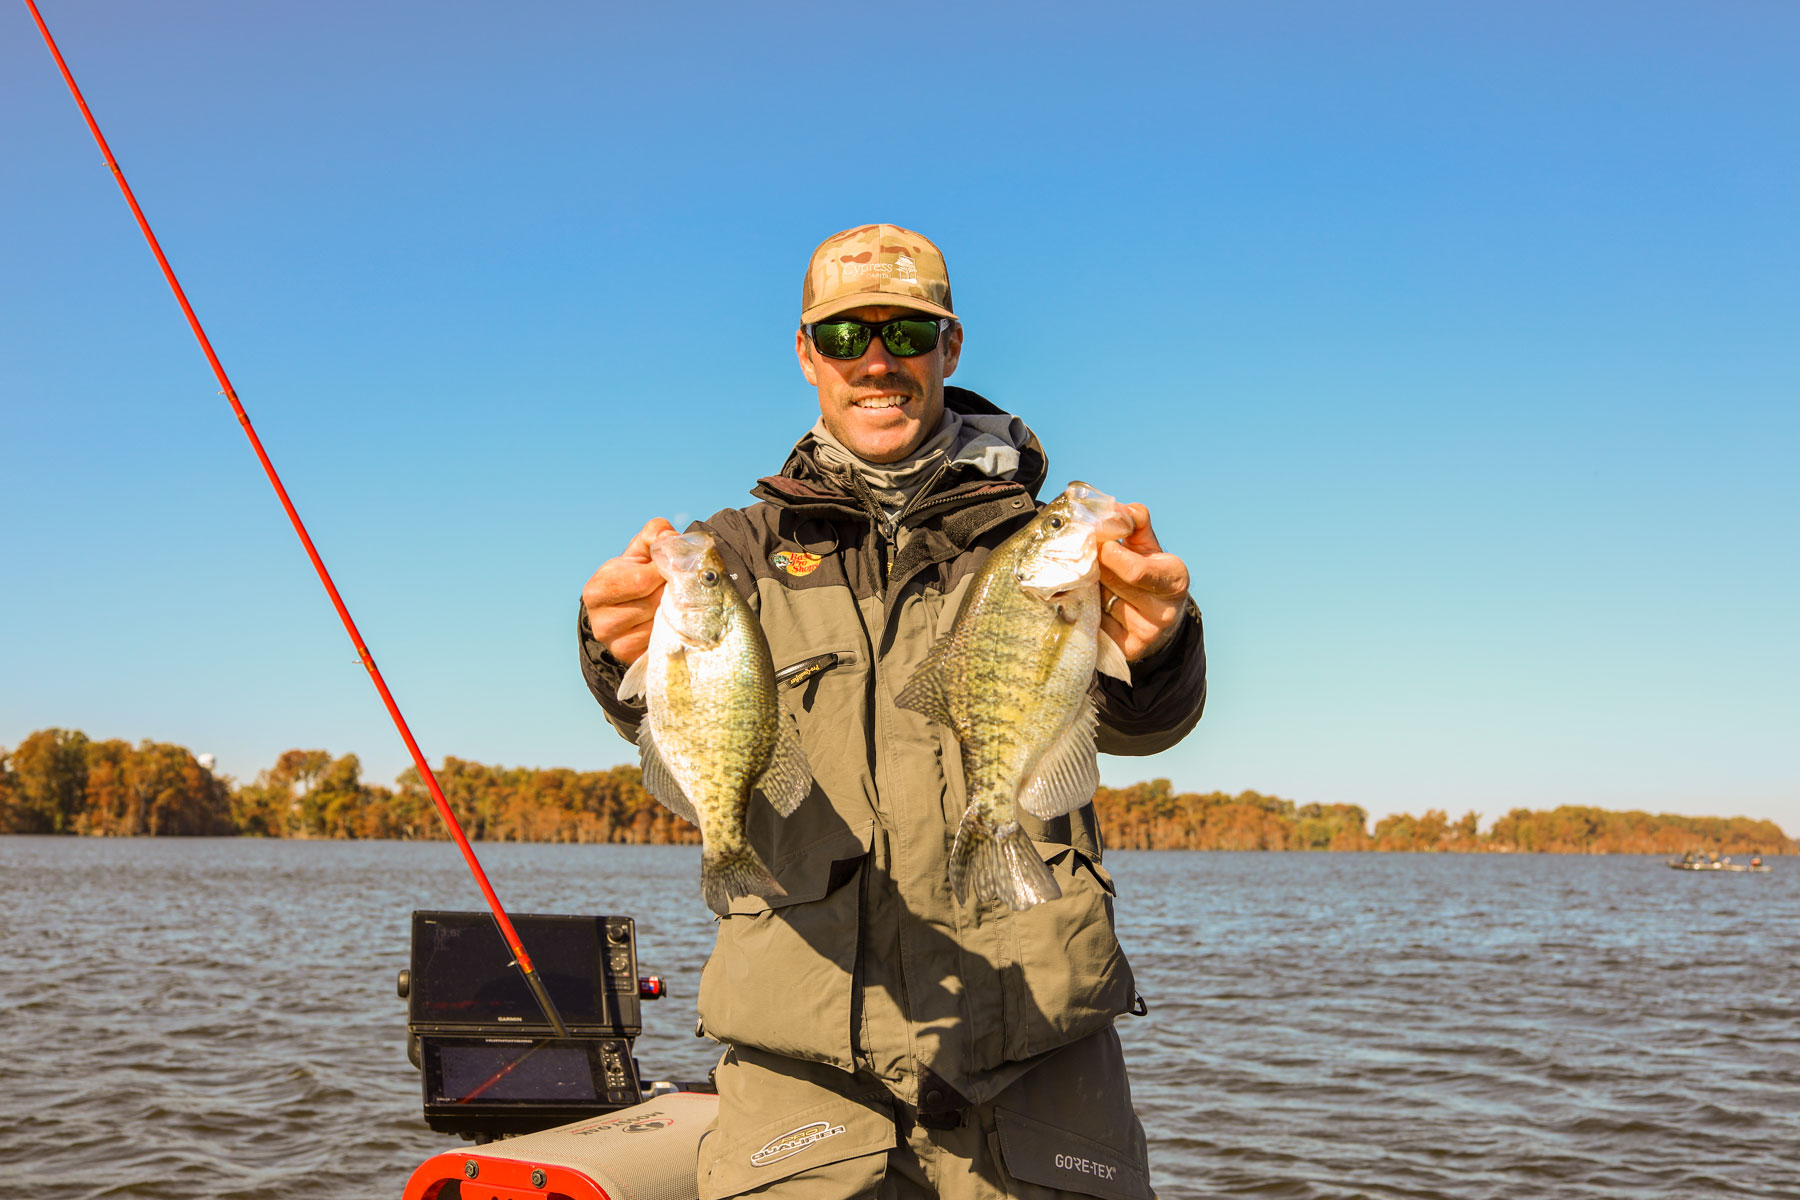 Best Crappie & Livescope Rods On The Planet